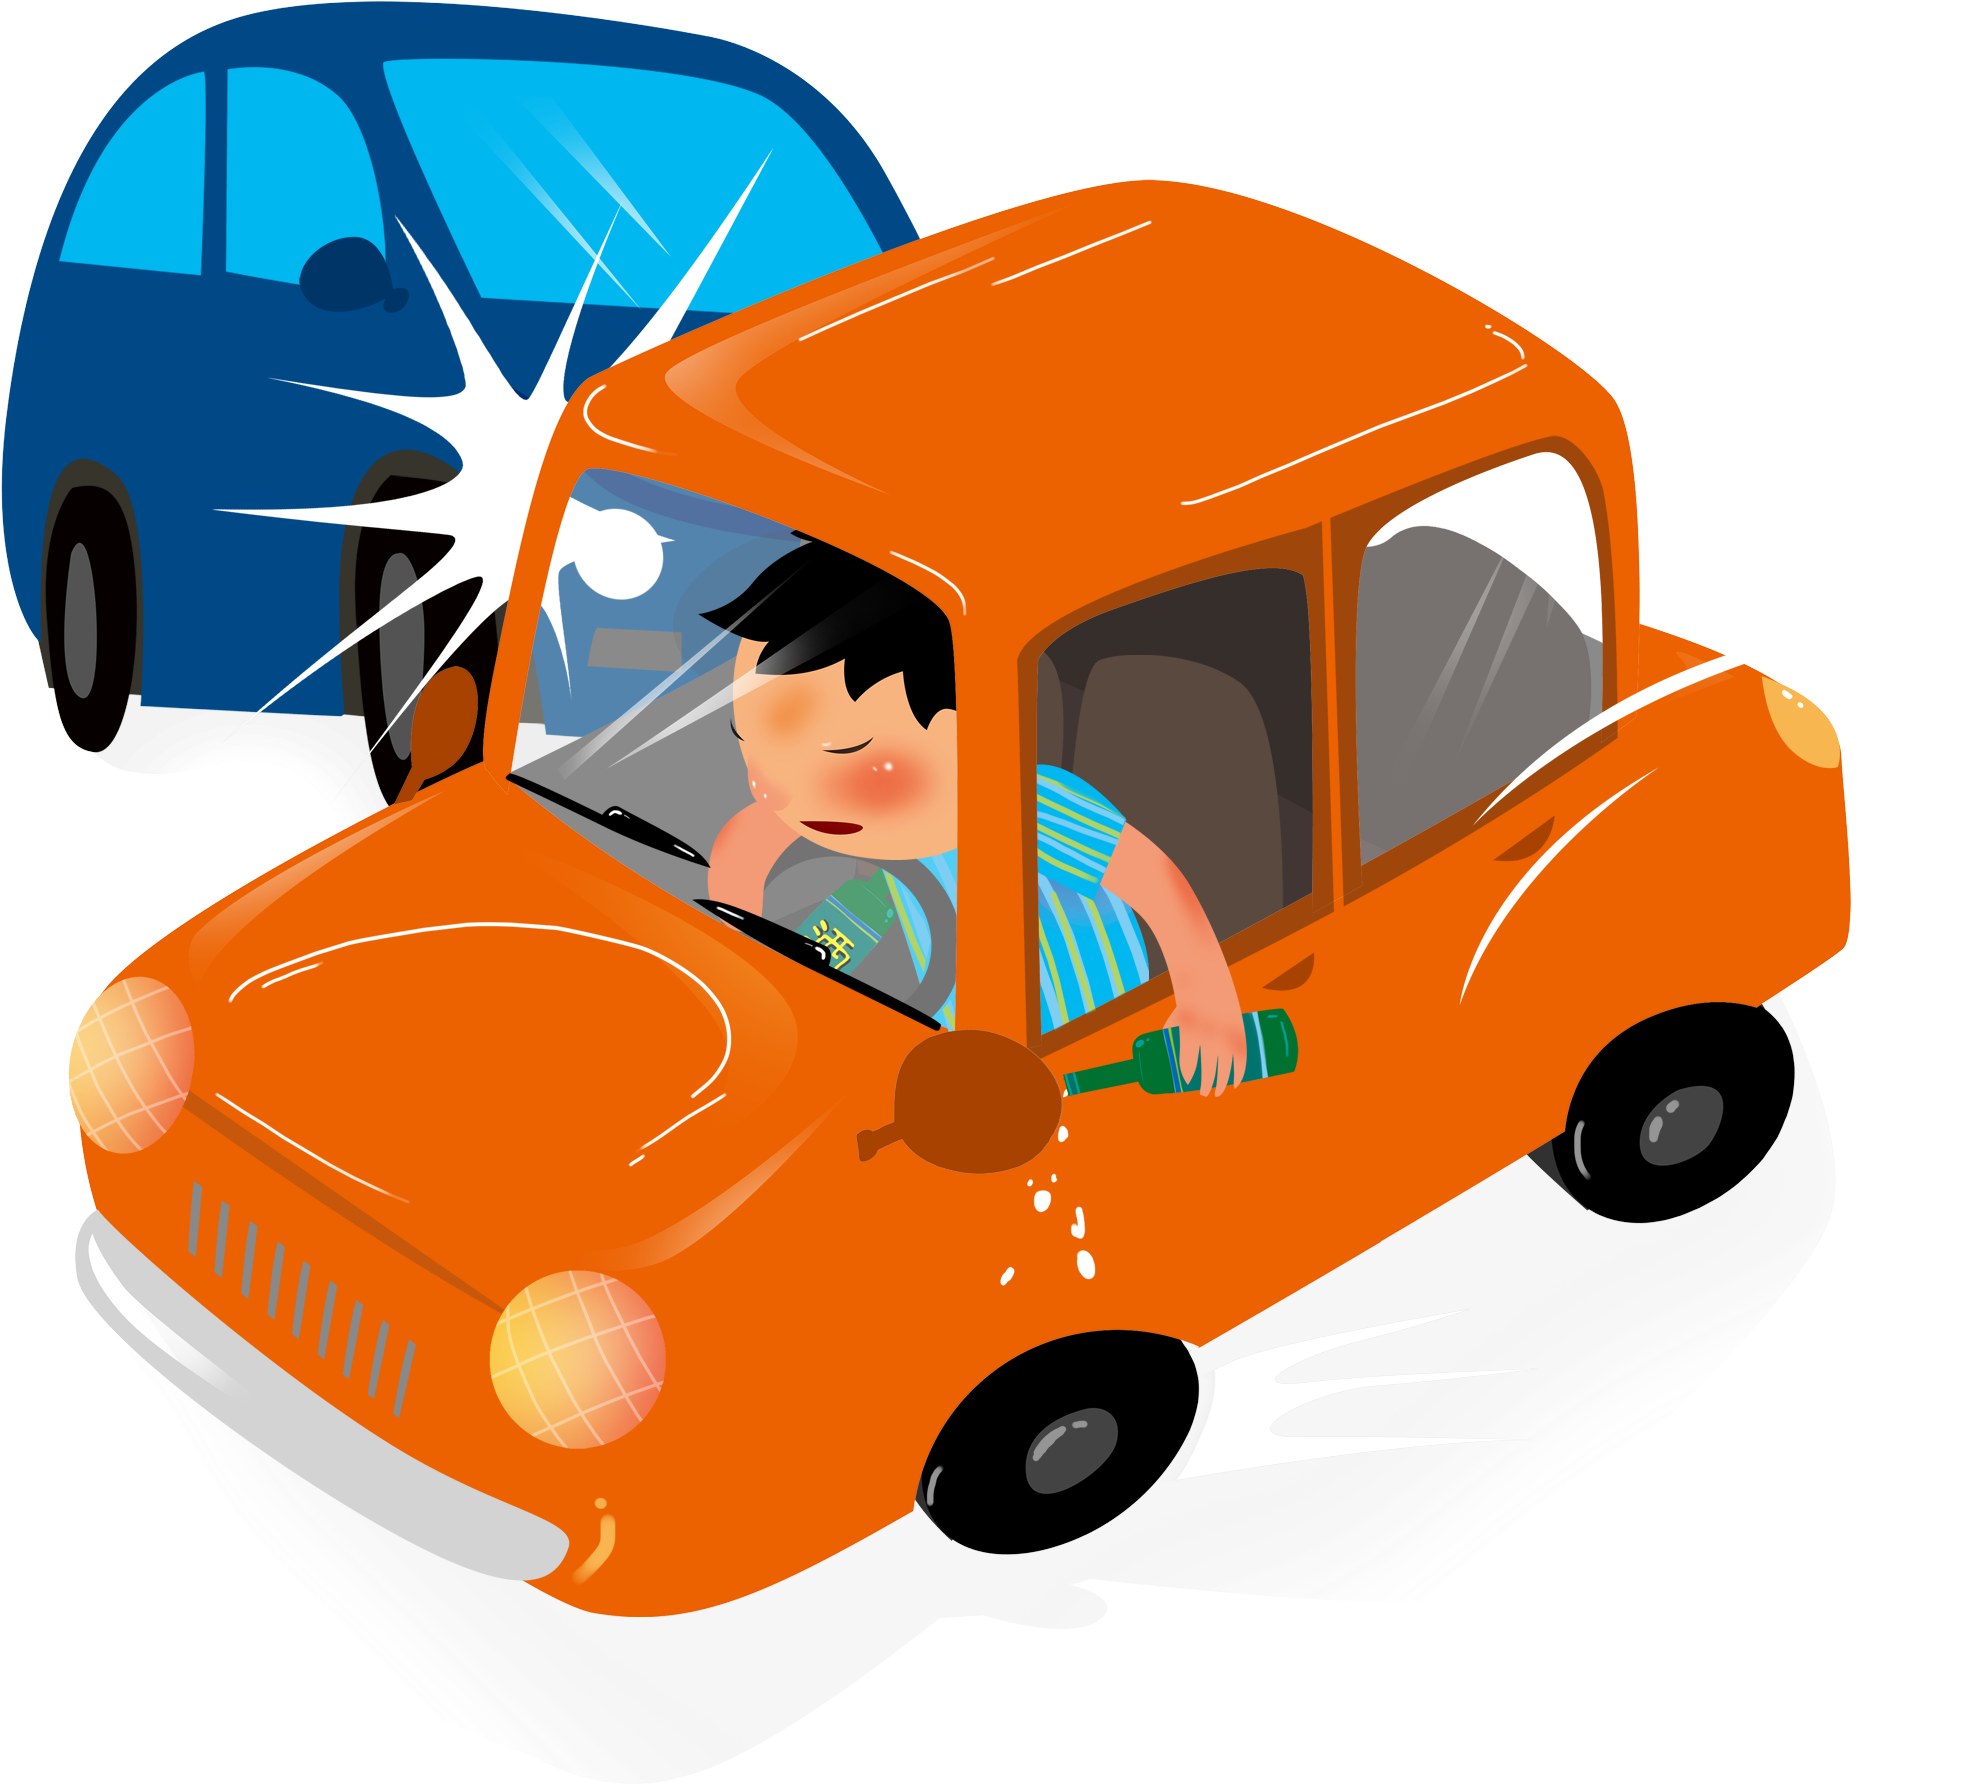 Cartoon Hand Drawn Illustration Car Accident Png And - Cartoon Hand Drawn Illustration Car Accident Png And (2000x2000)